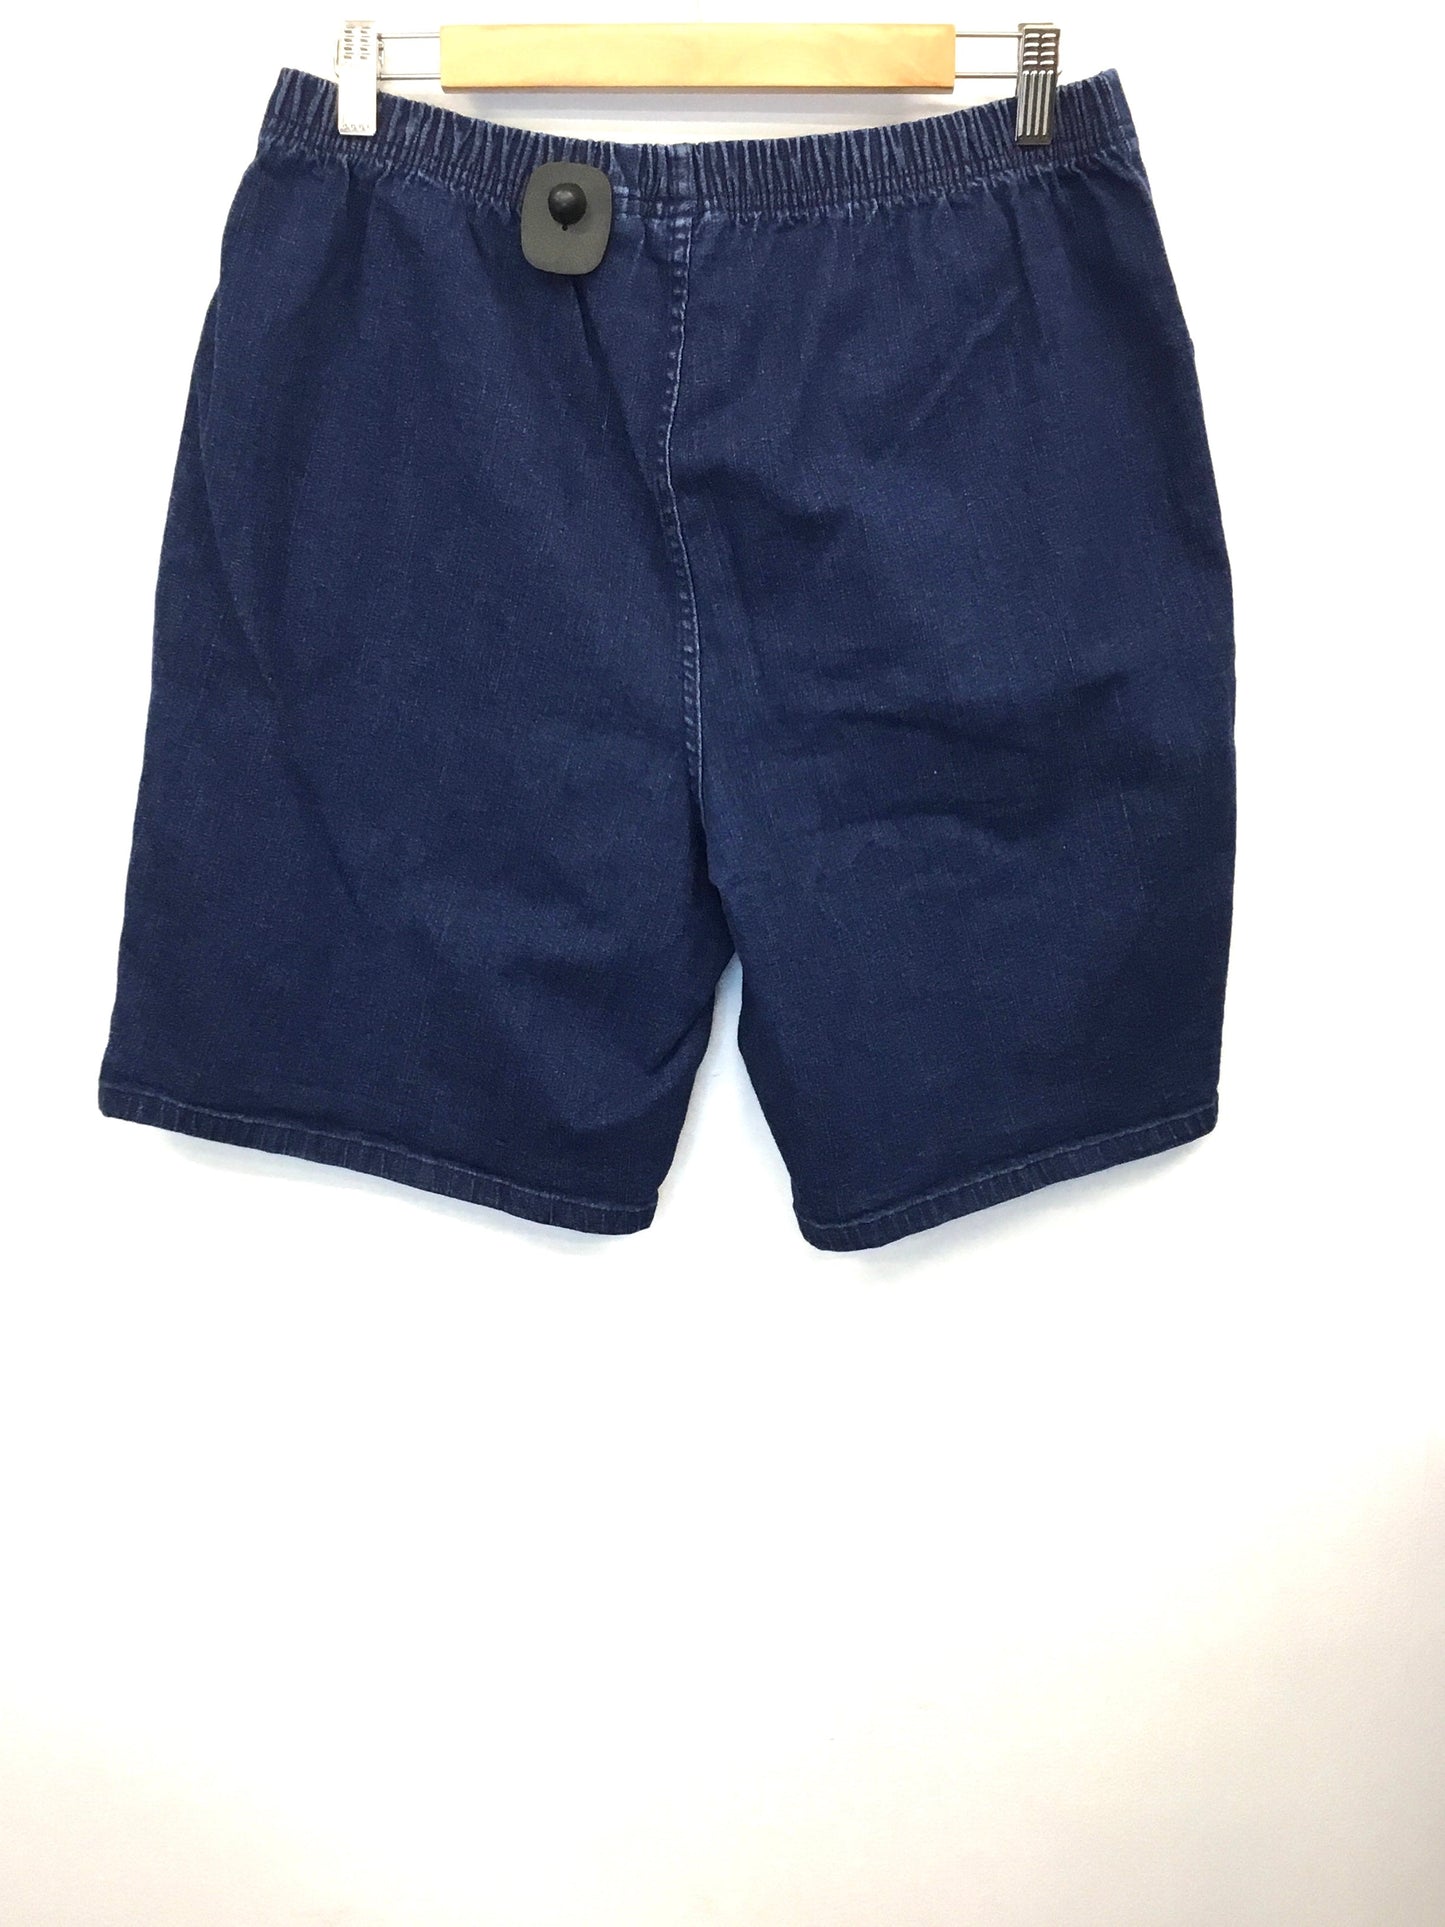 Shorts By Croft And Barrow  Size: 1x